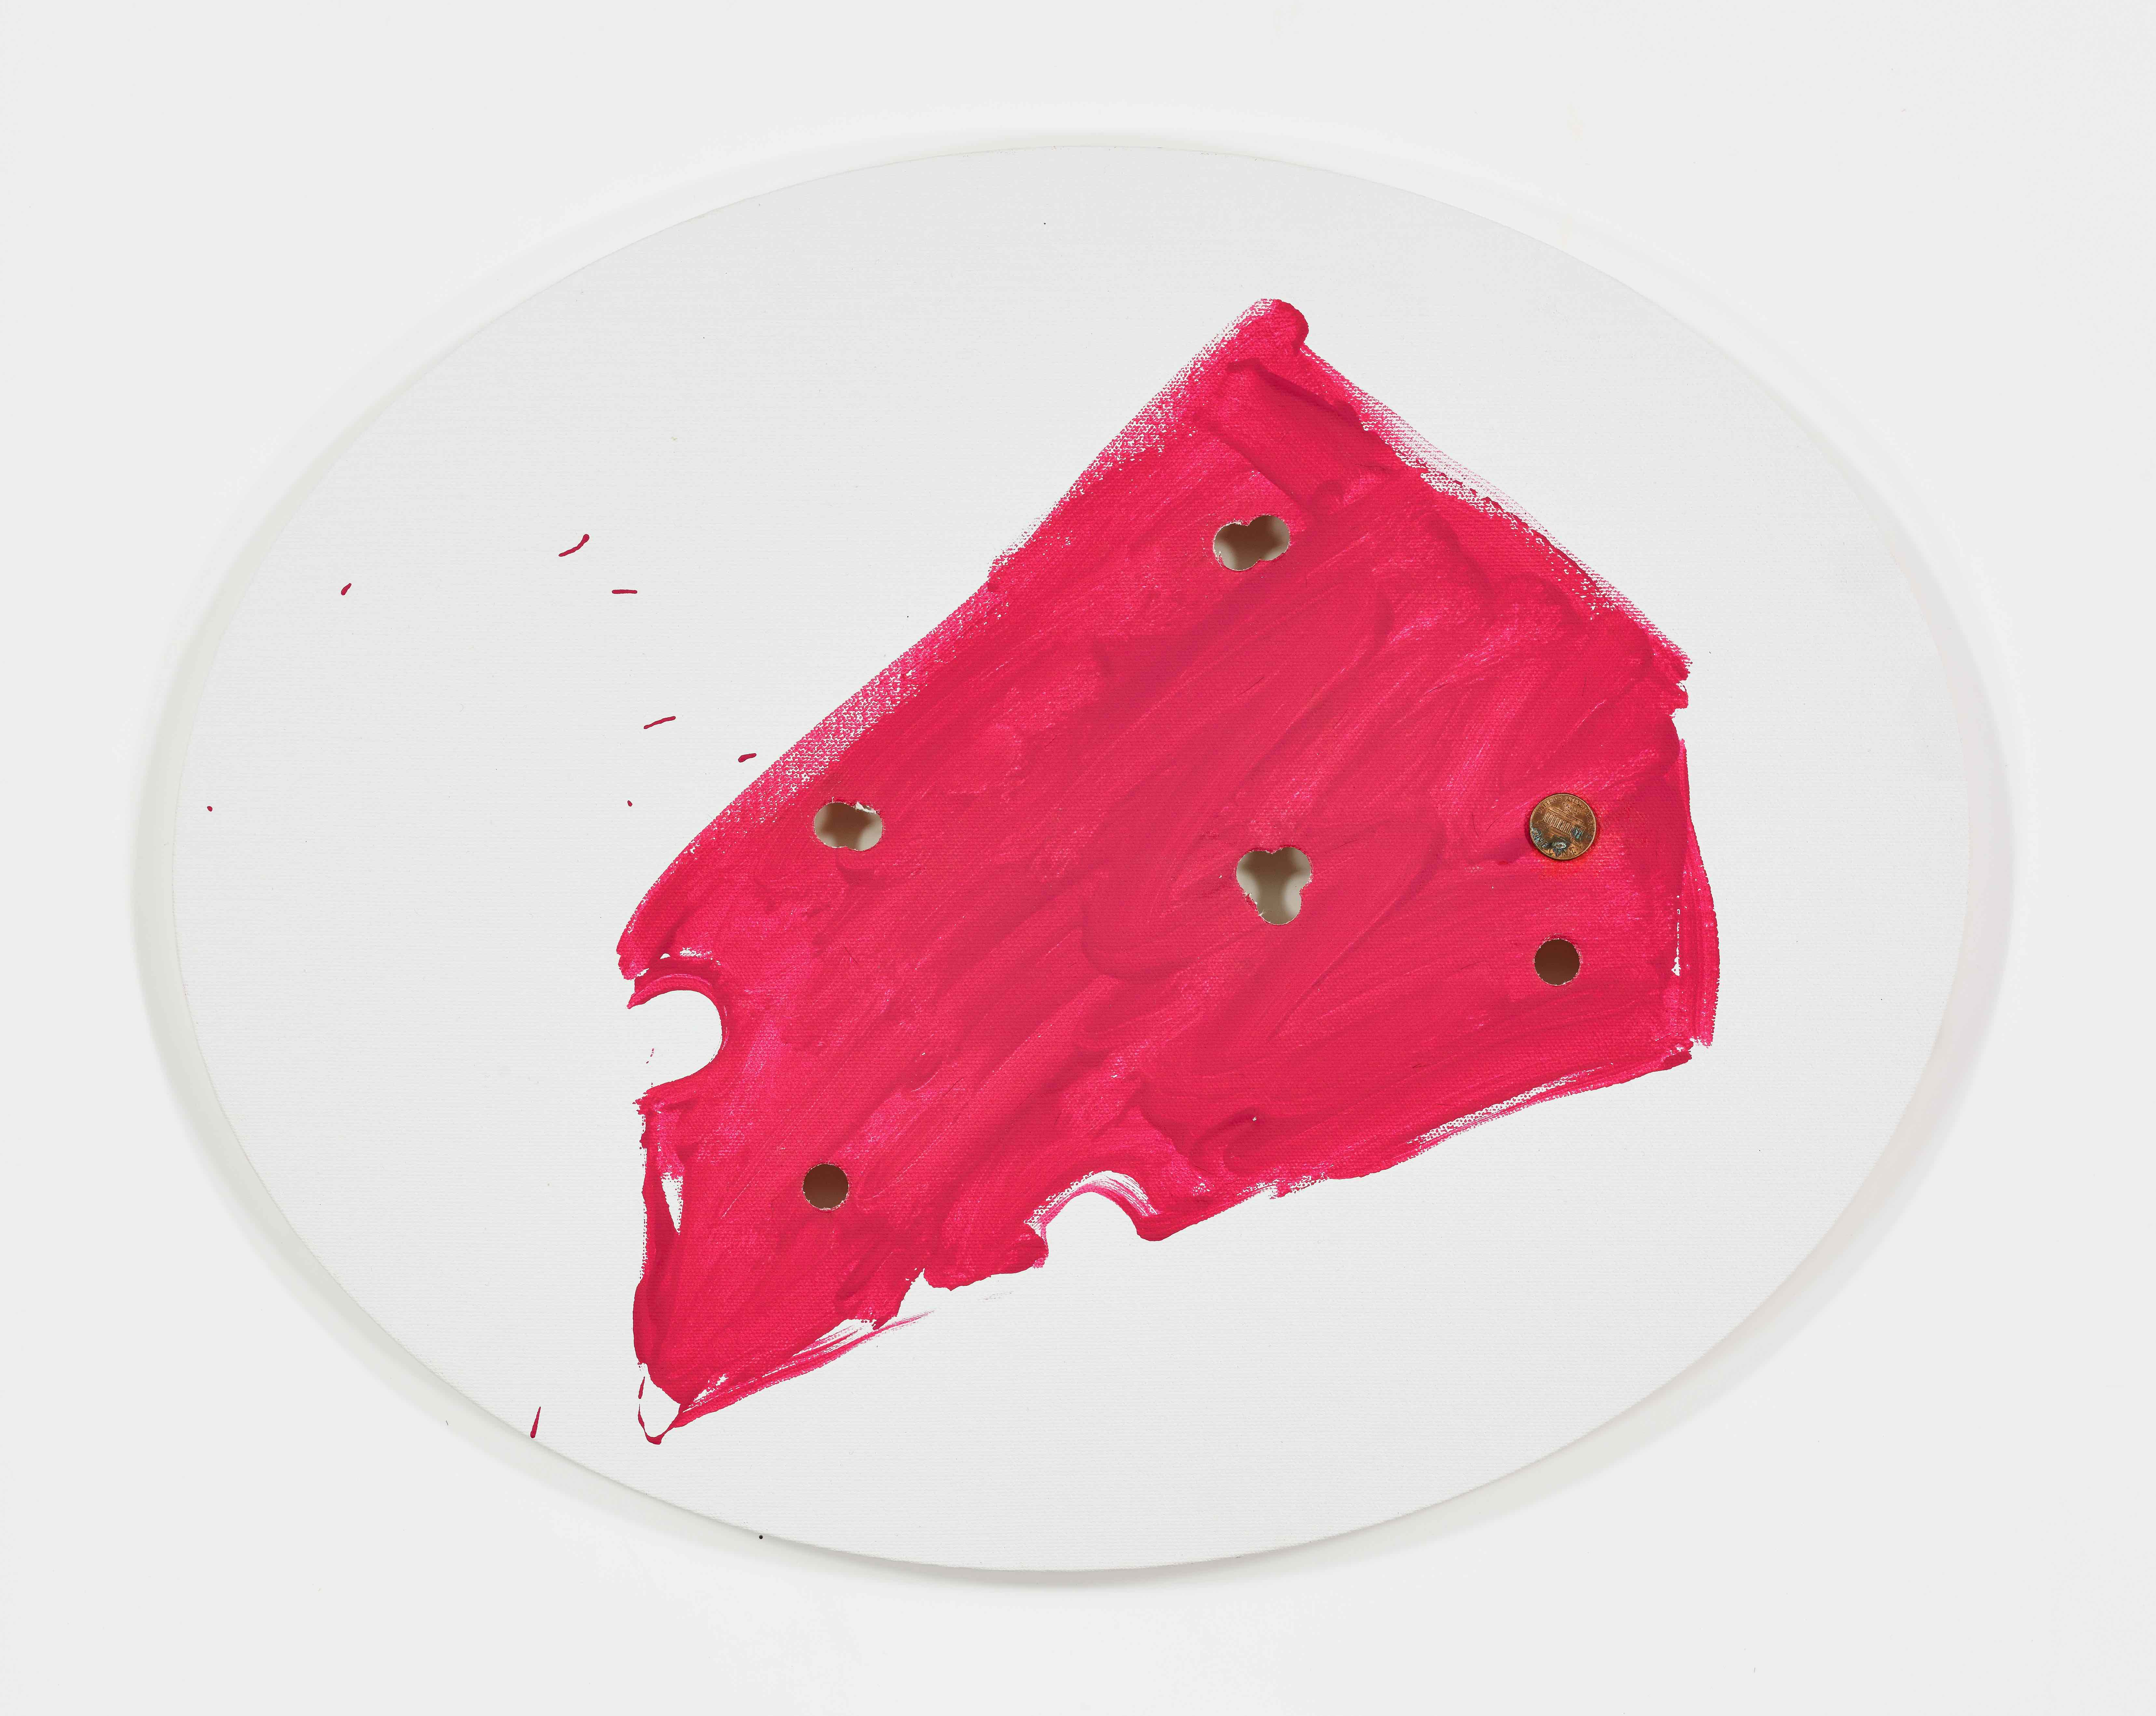 Pink Cheese Painting #2, 2012